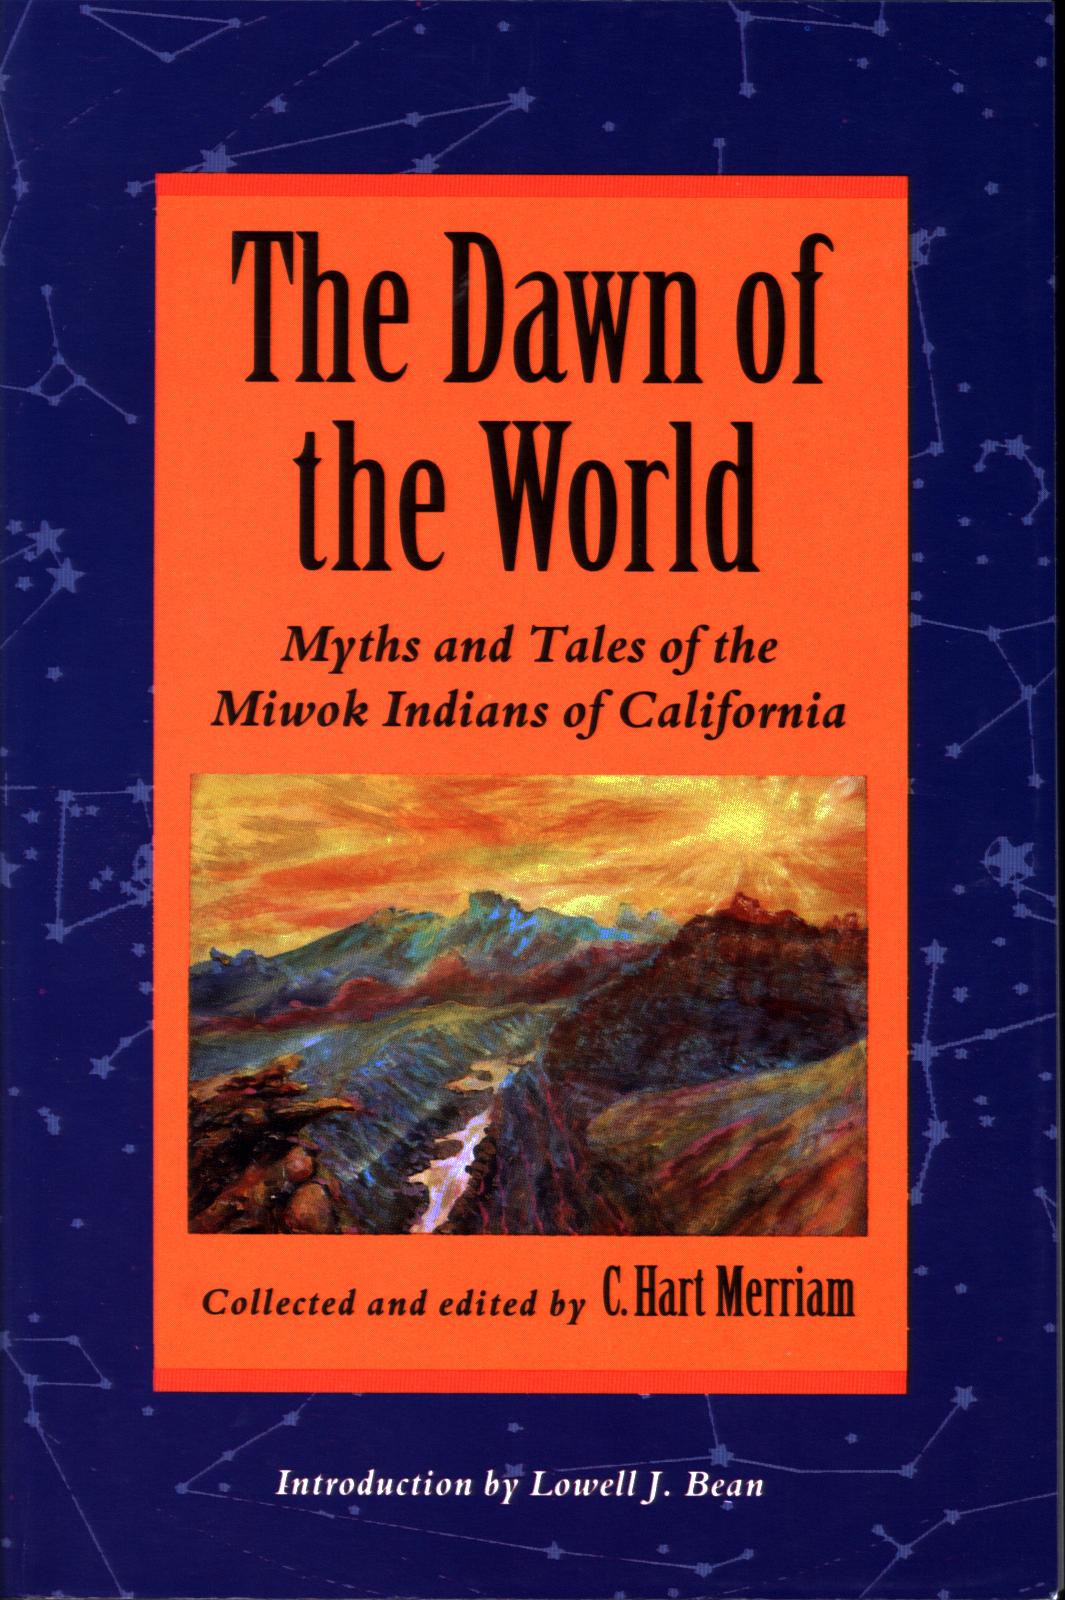 THE DAWN OF THE WORLD: myths and tales of the Miwok Indians of California